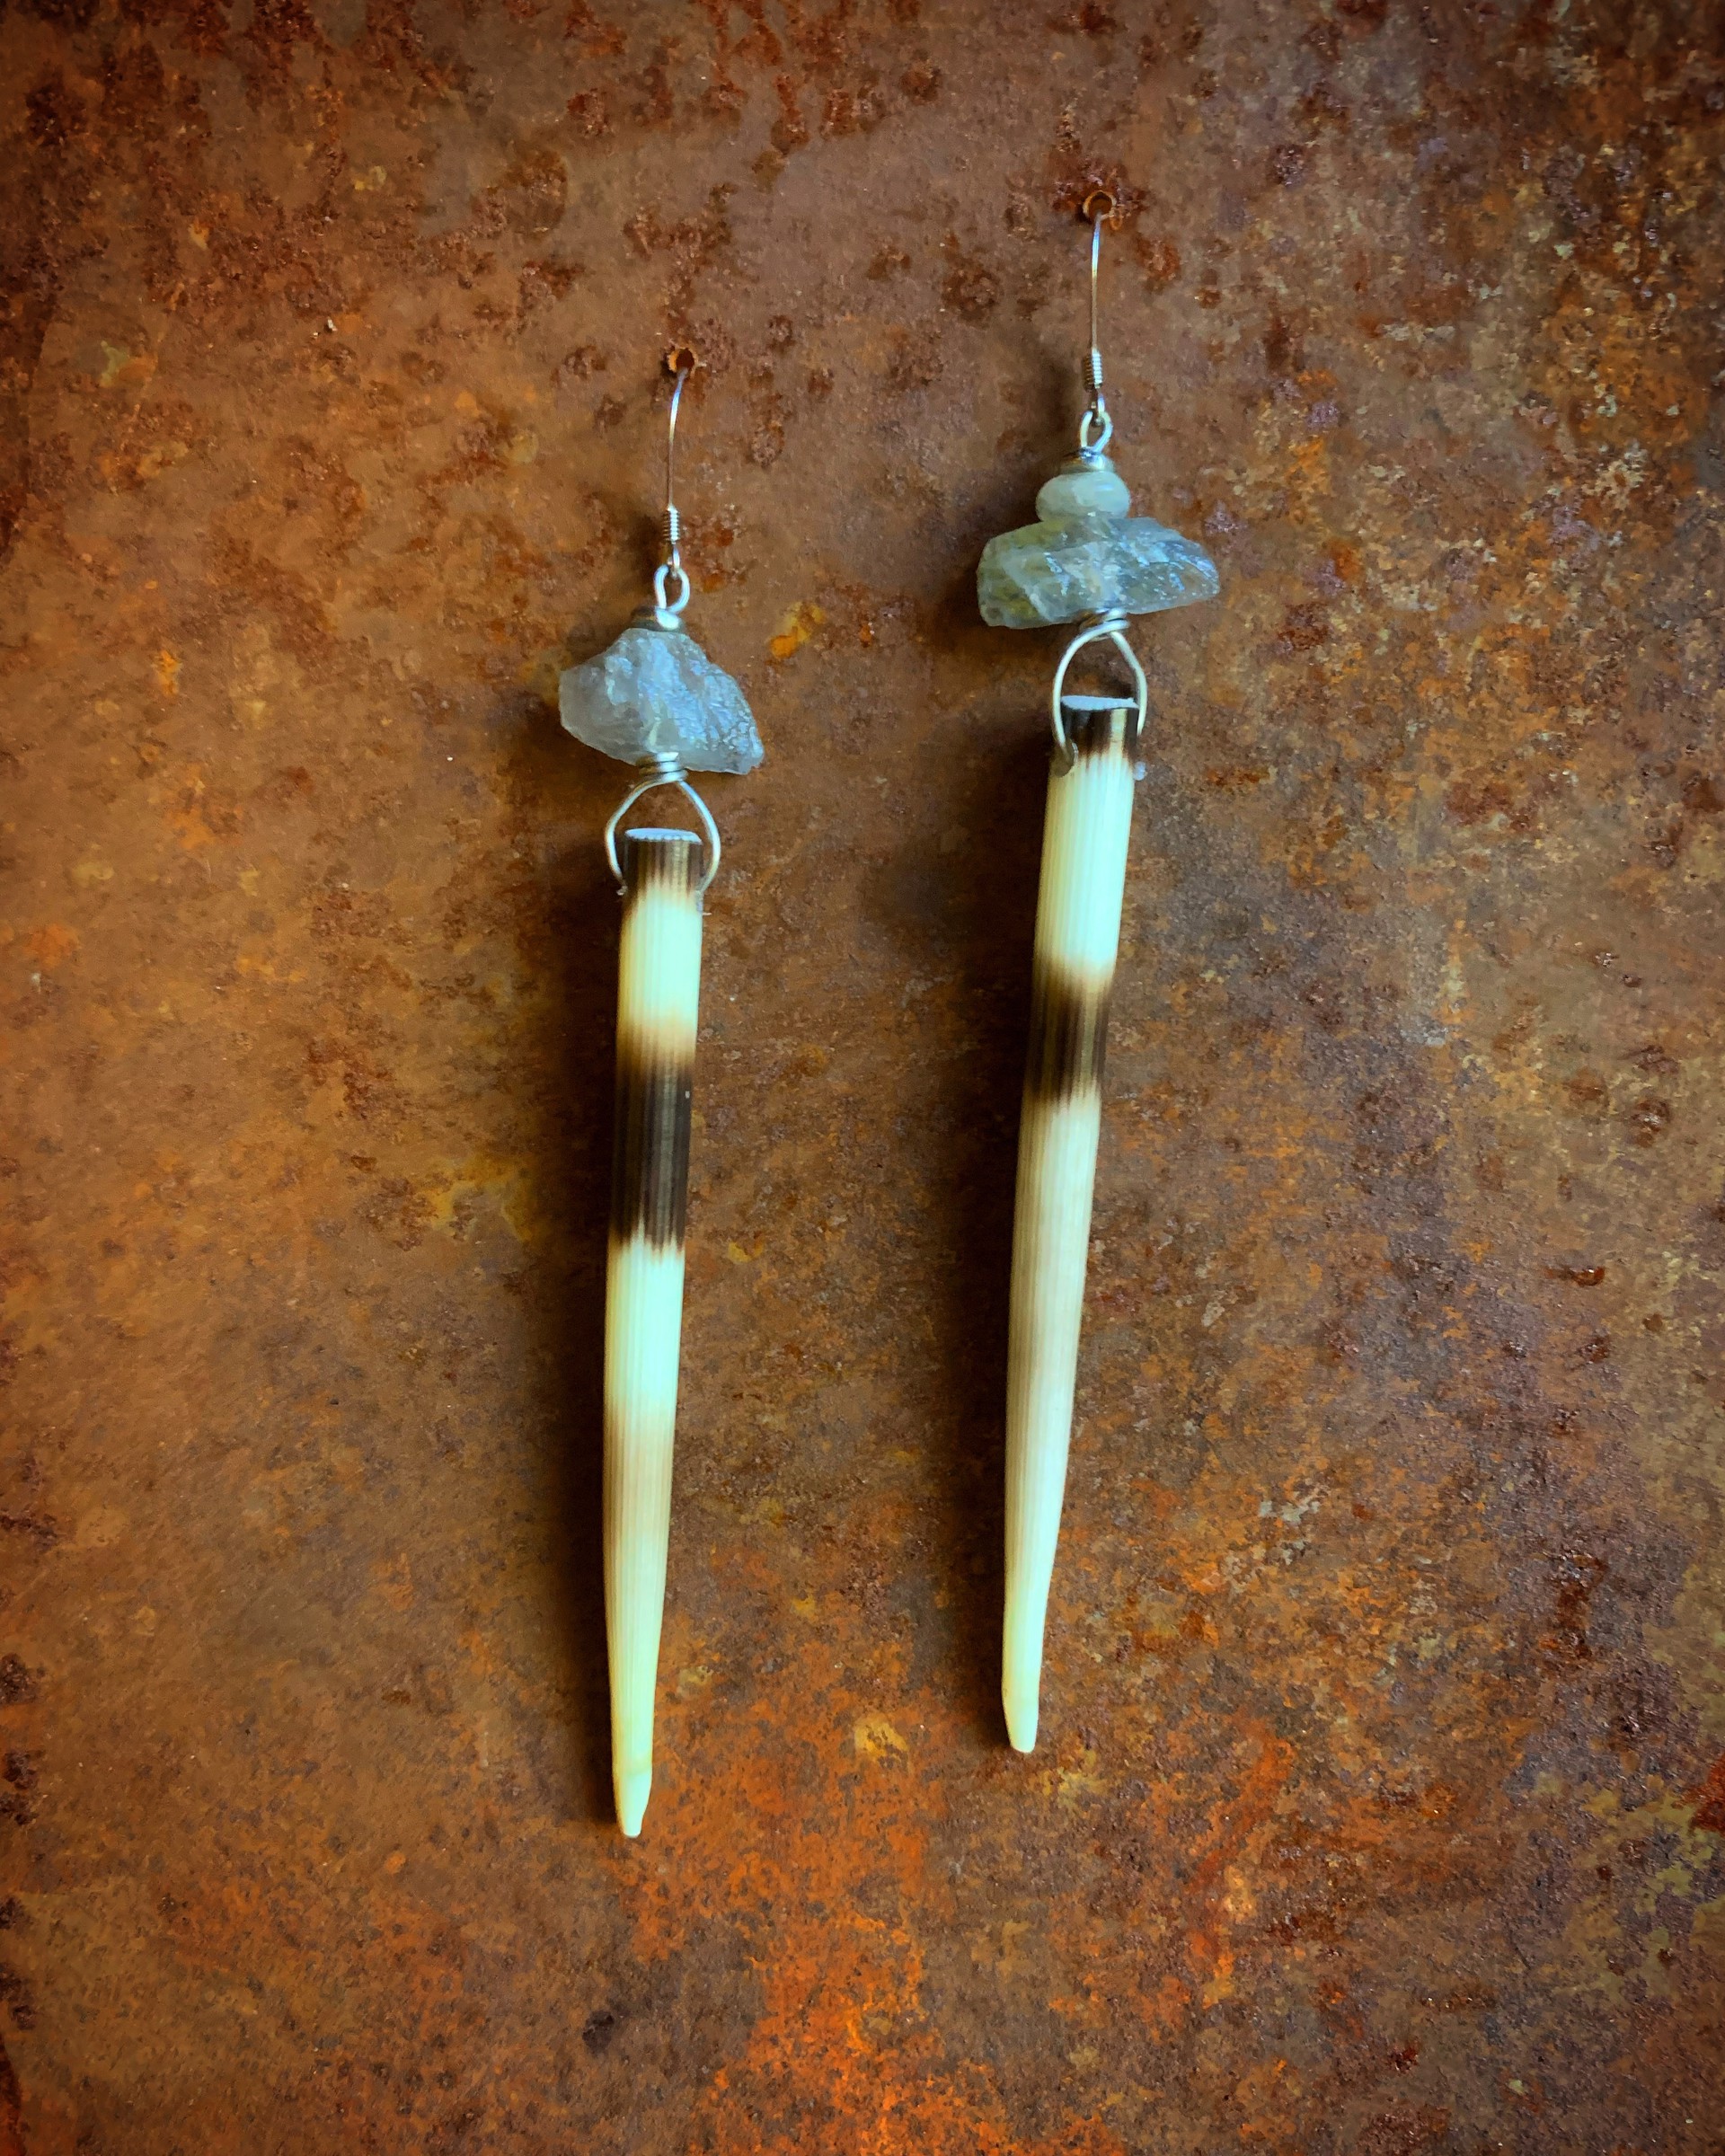 K504 African Porcupine Quills with Labradorite by Kelly Ormsby